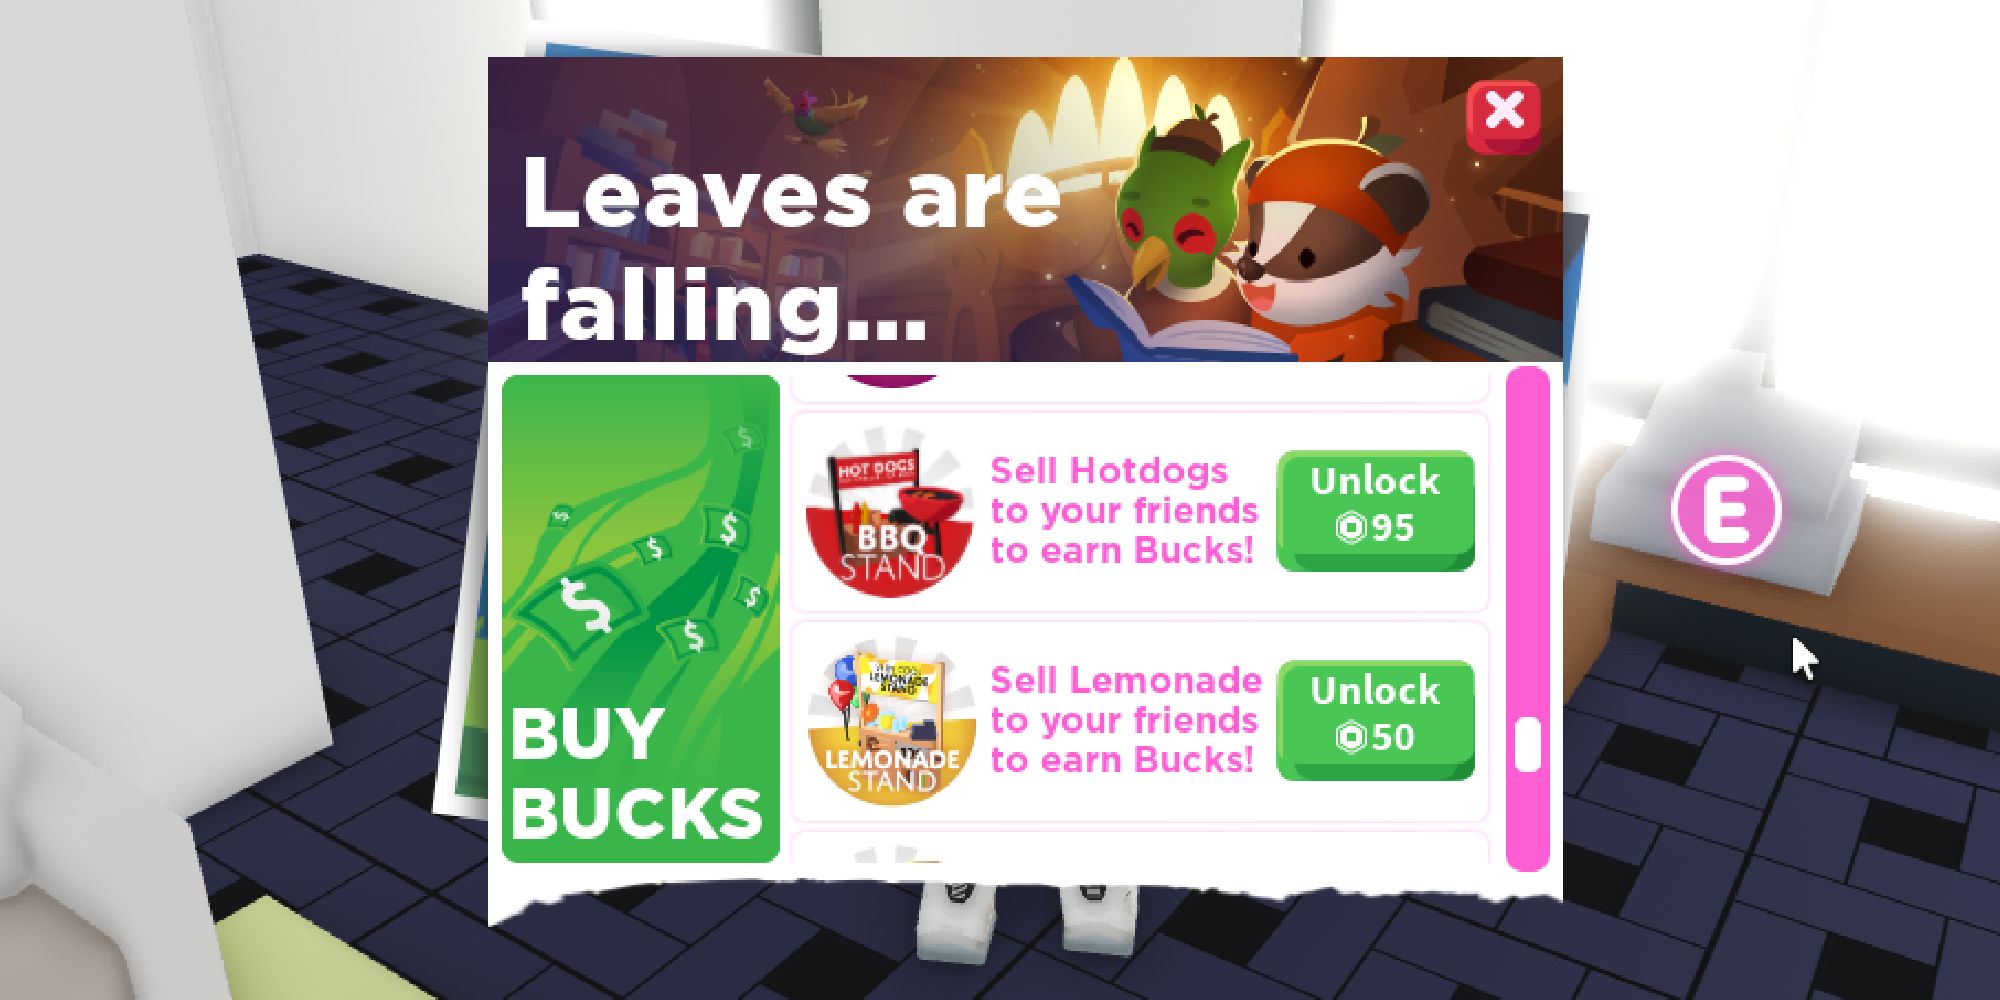 purchasing the lemonade stand from the shop screen for 50 robux